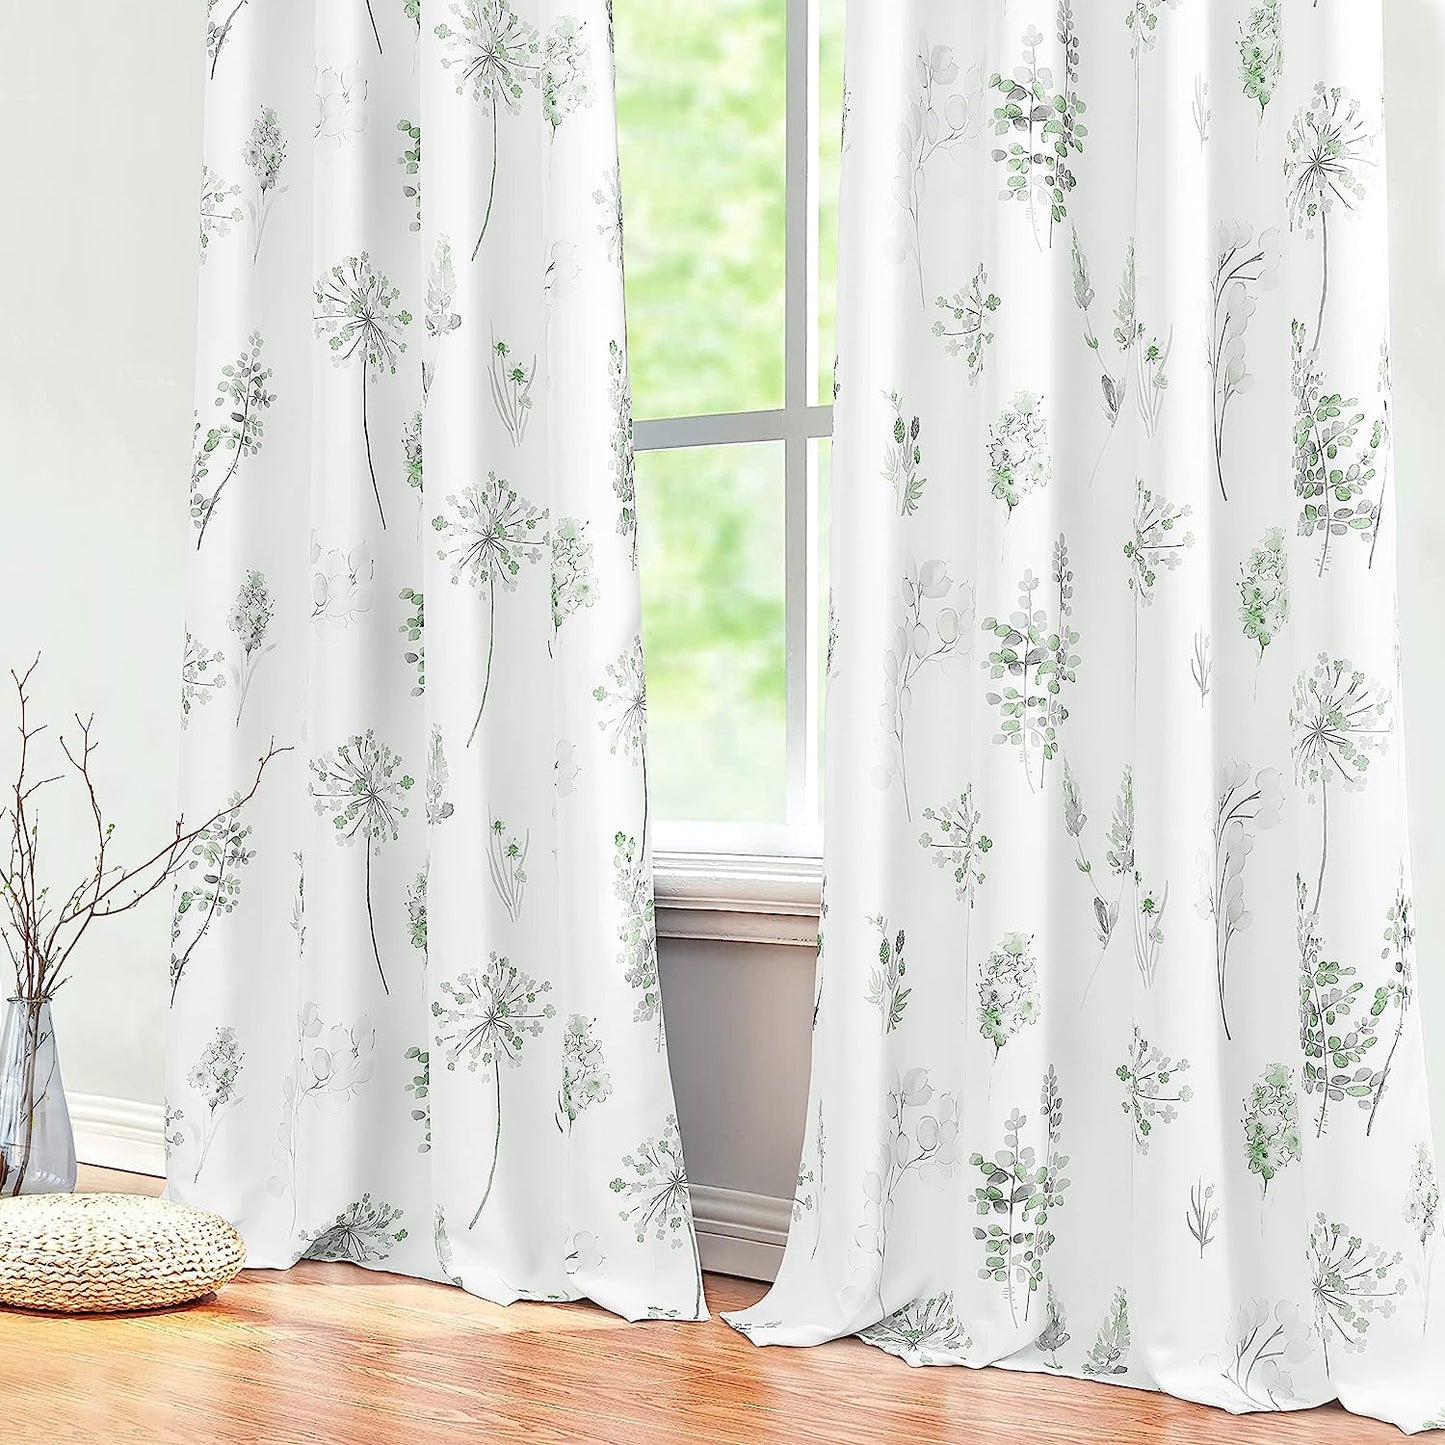 XTMYI 63 Inch Length Sage Green Window Curtains for Bedroom 2 Panels,Room Darkening Watercolor Floral Leaves 80% Blackout Flowered Printed Curtains for Living Room with Grommet,1 Pair Set  XTMYI Green  Grey 52"X84" 